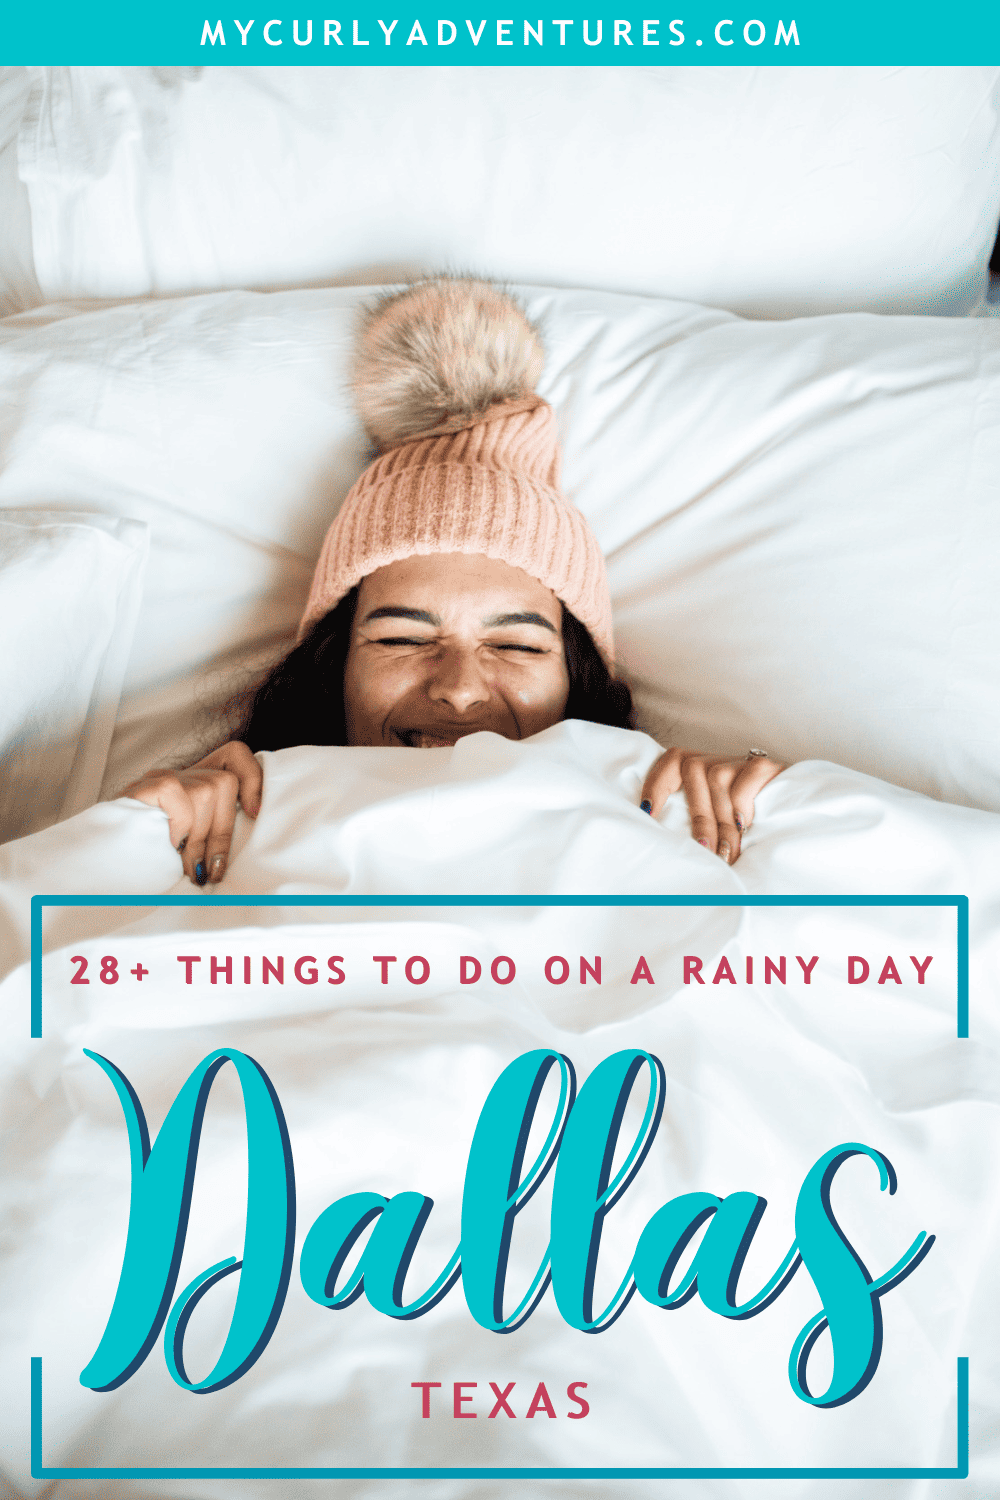 Things to do in Dallas on a Rainy Day